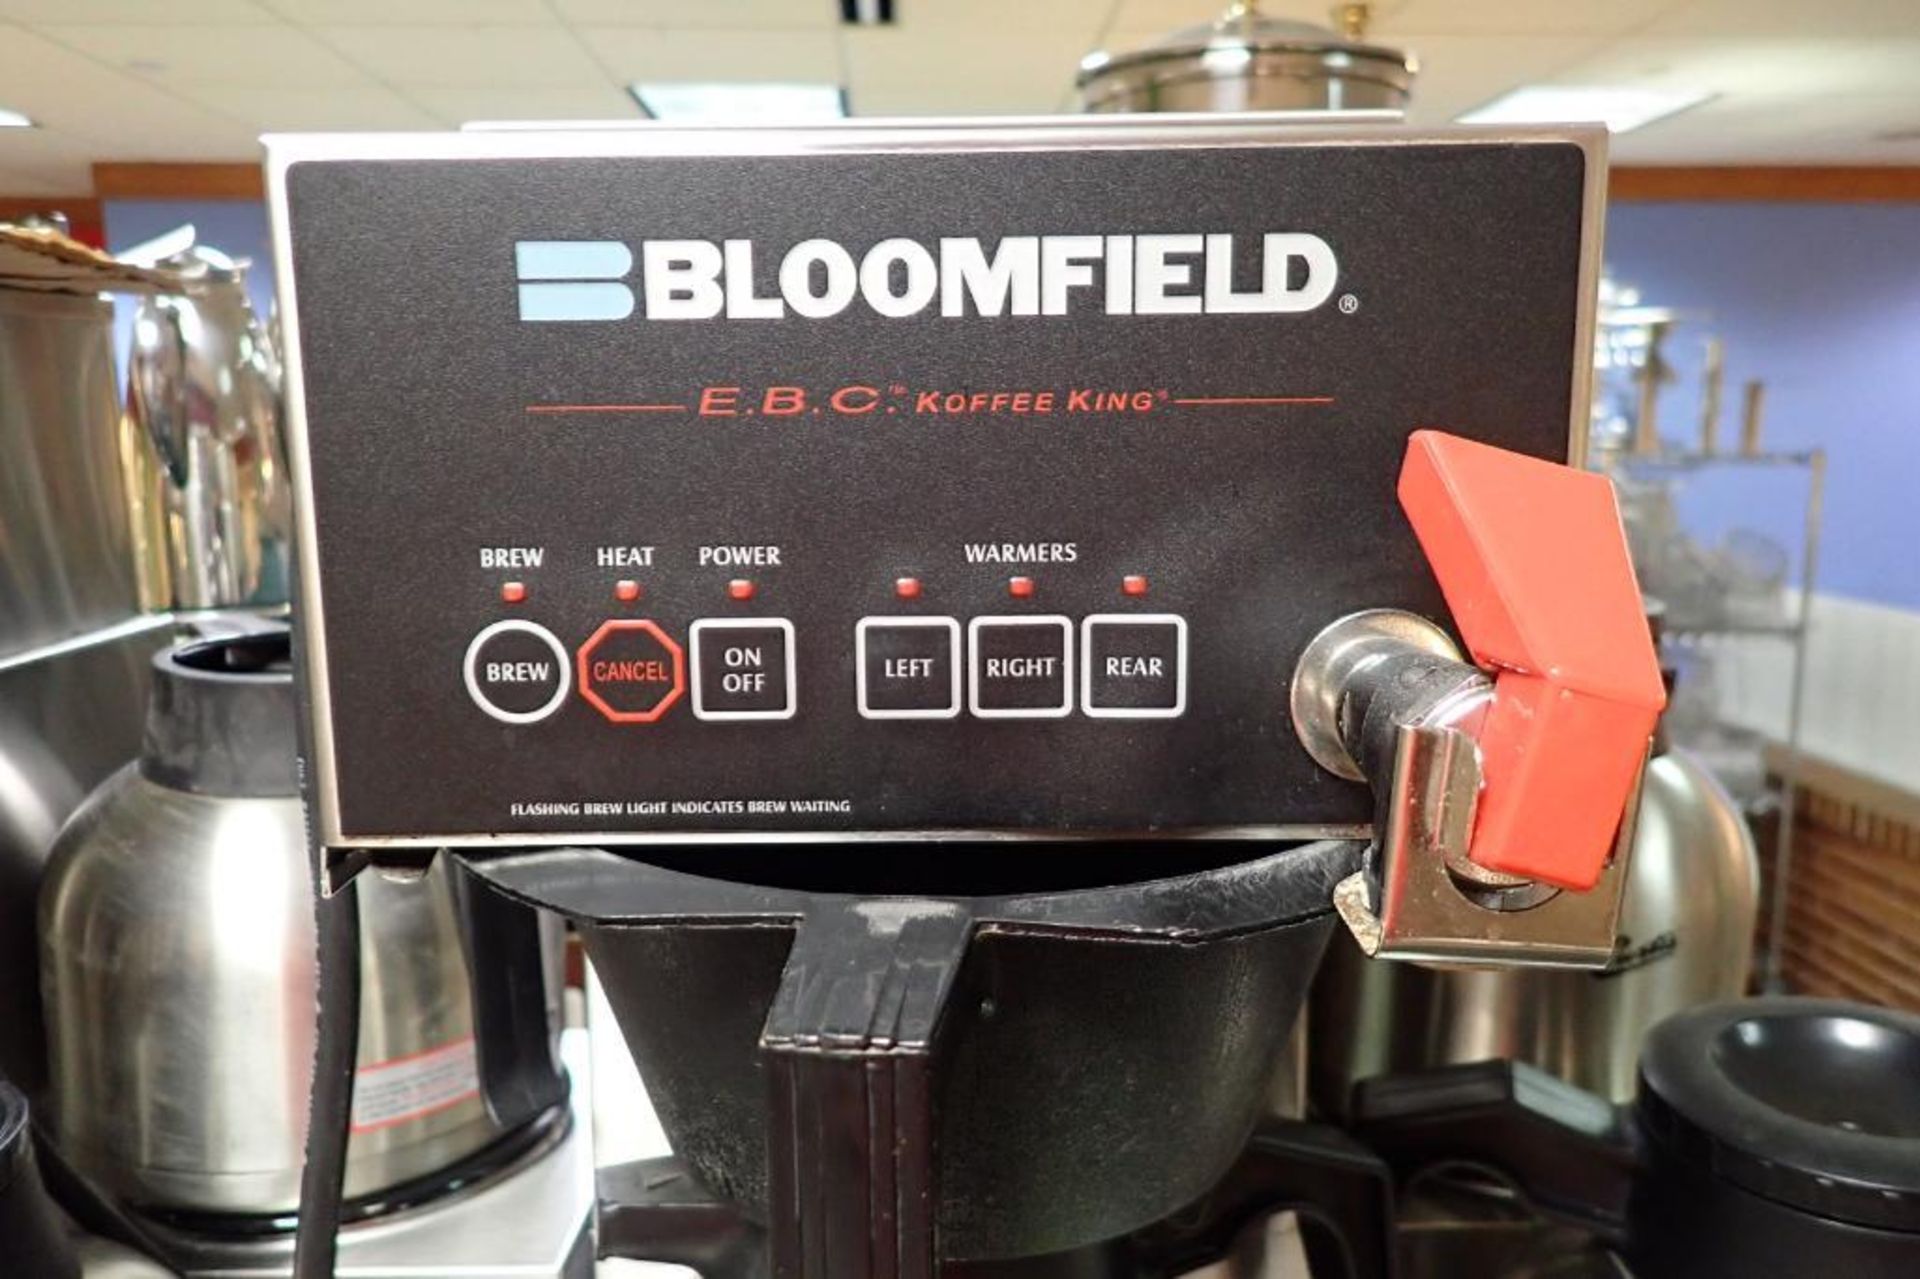 Bloomfield coffee maker with 2 coffee pots - Image 2 of 5